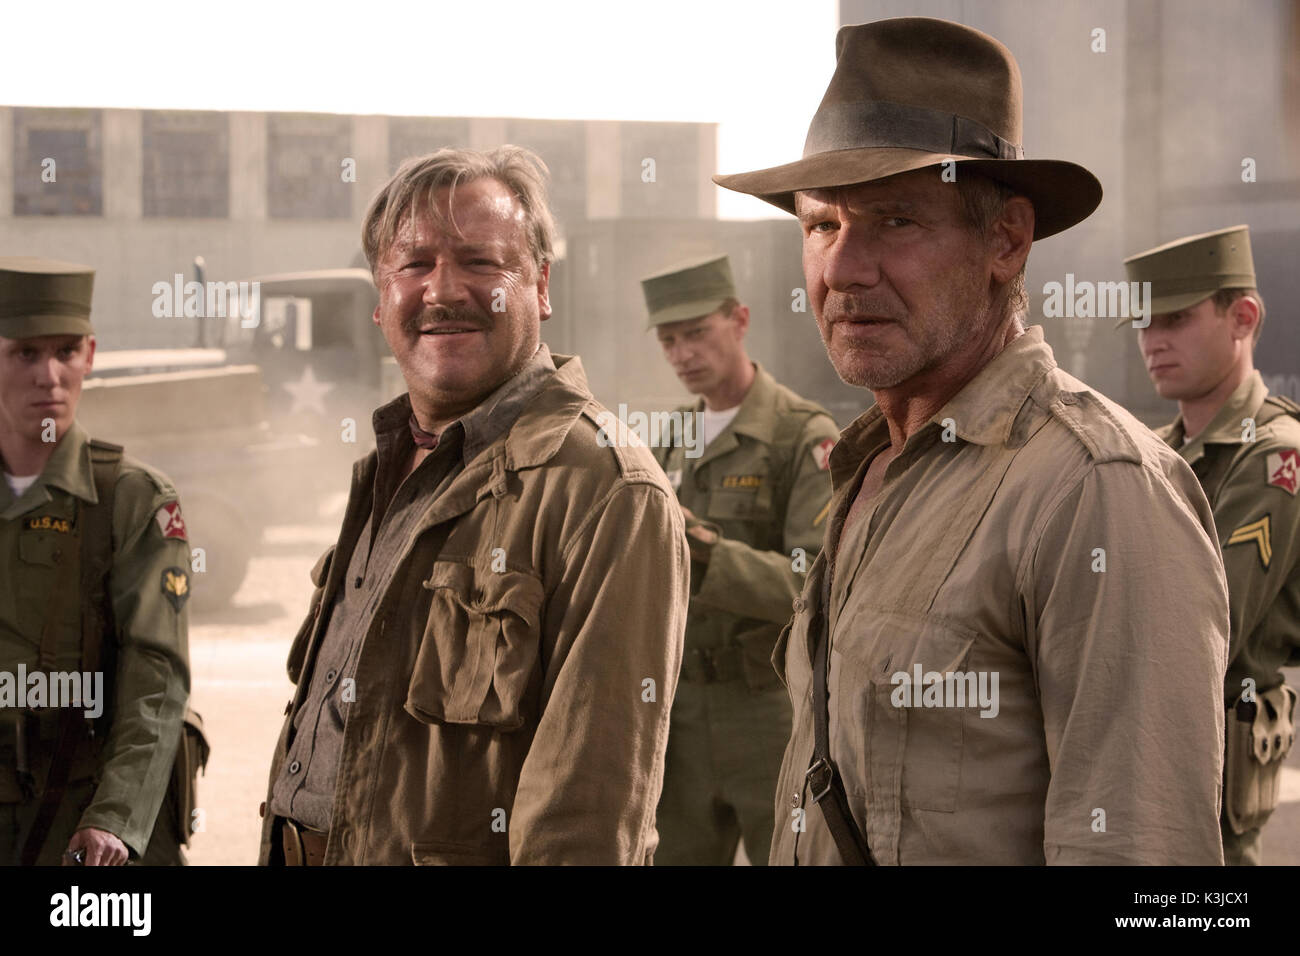 INDIANA JONES AND THE KINGDOM OF THE CRYSTAL SKULL RAY WINSTONE, HARRISON FORD     Date: 2008 Stock Photo